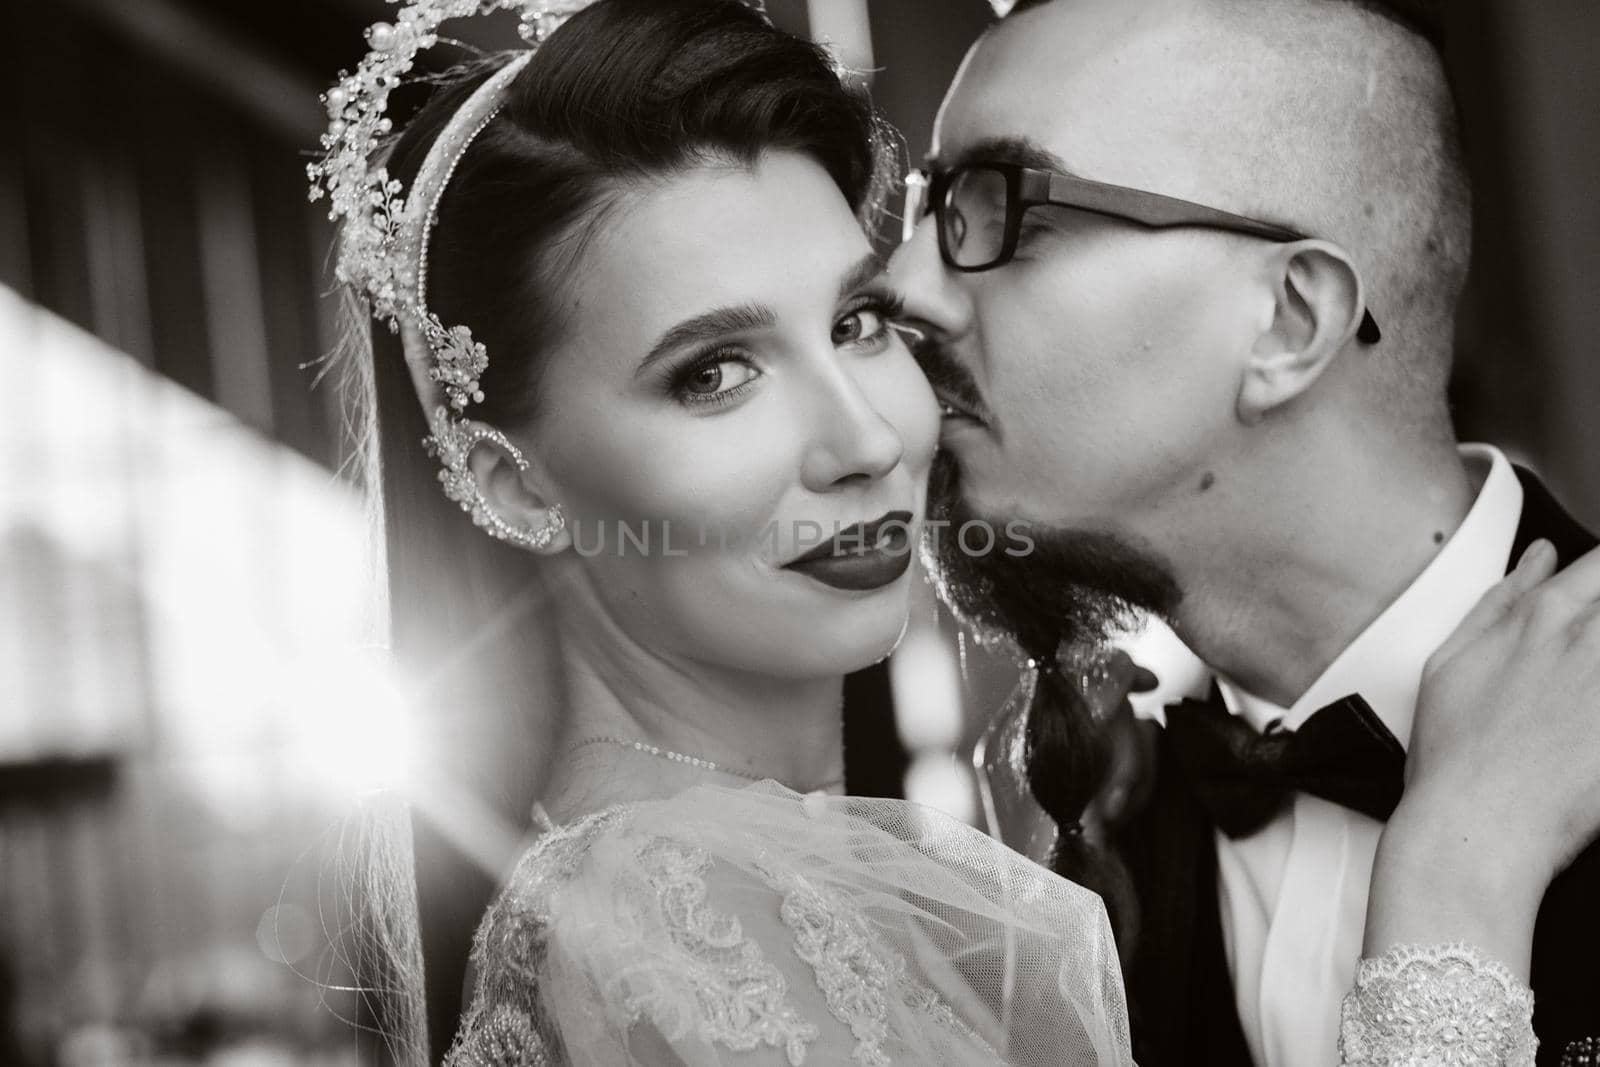 Stylish wedding couple in the interior. Glamorous bride and groom, black and white photo by Lobachad